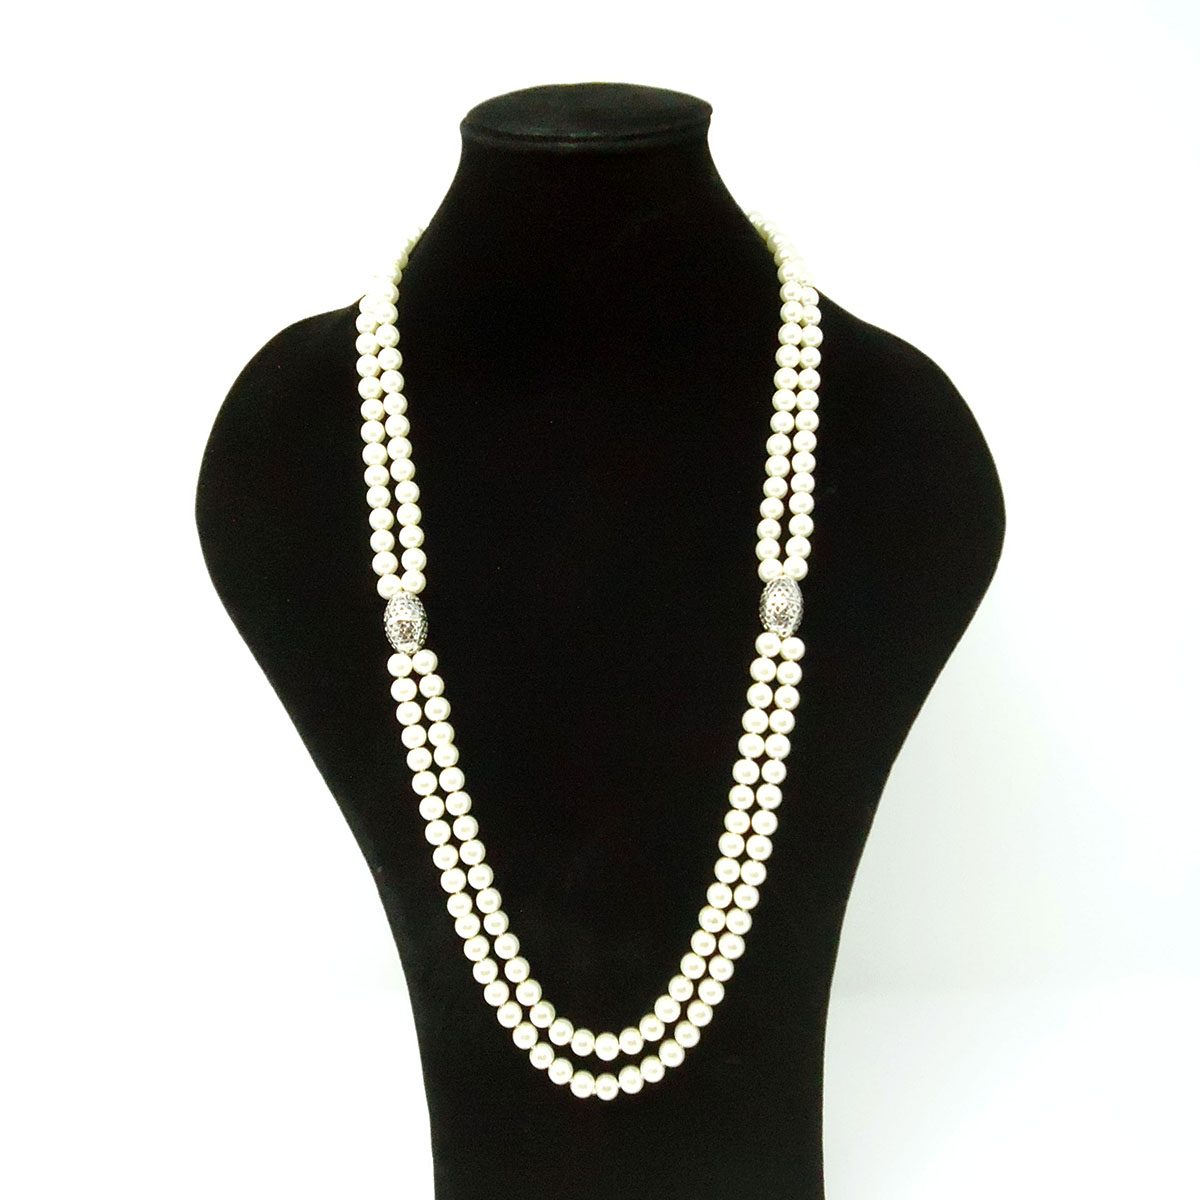 Long Pearl Necklace with Silver Accents - HMJServices